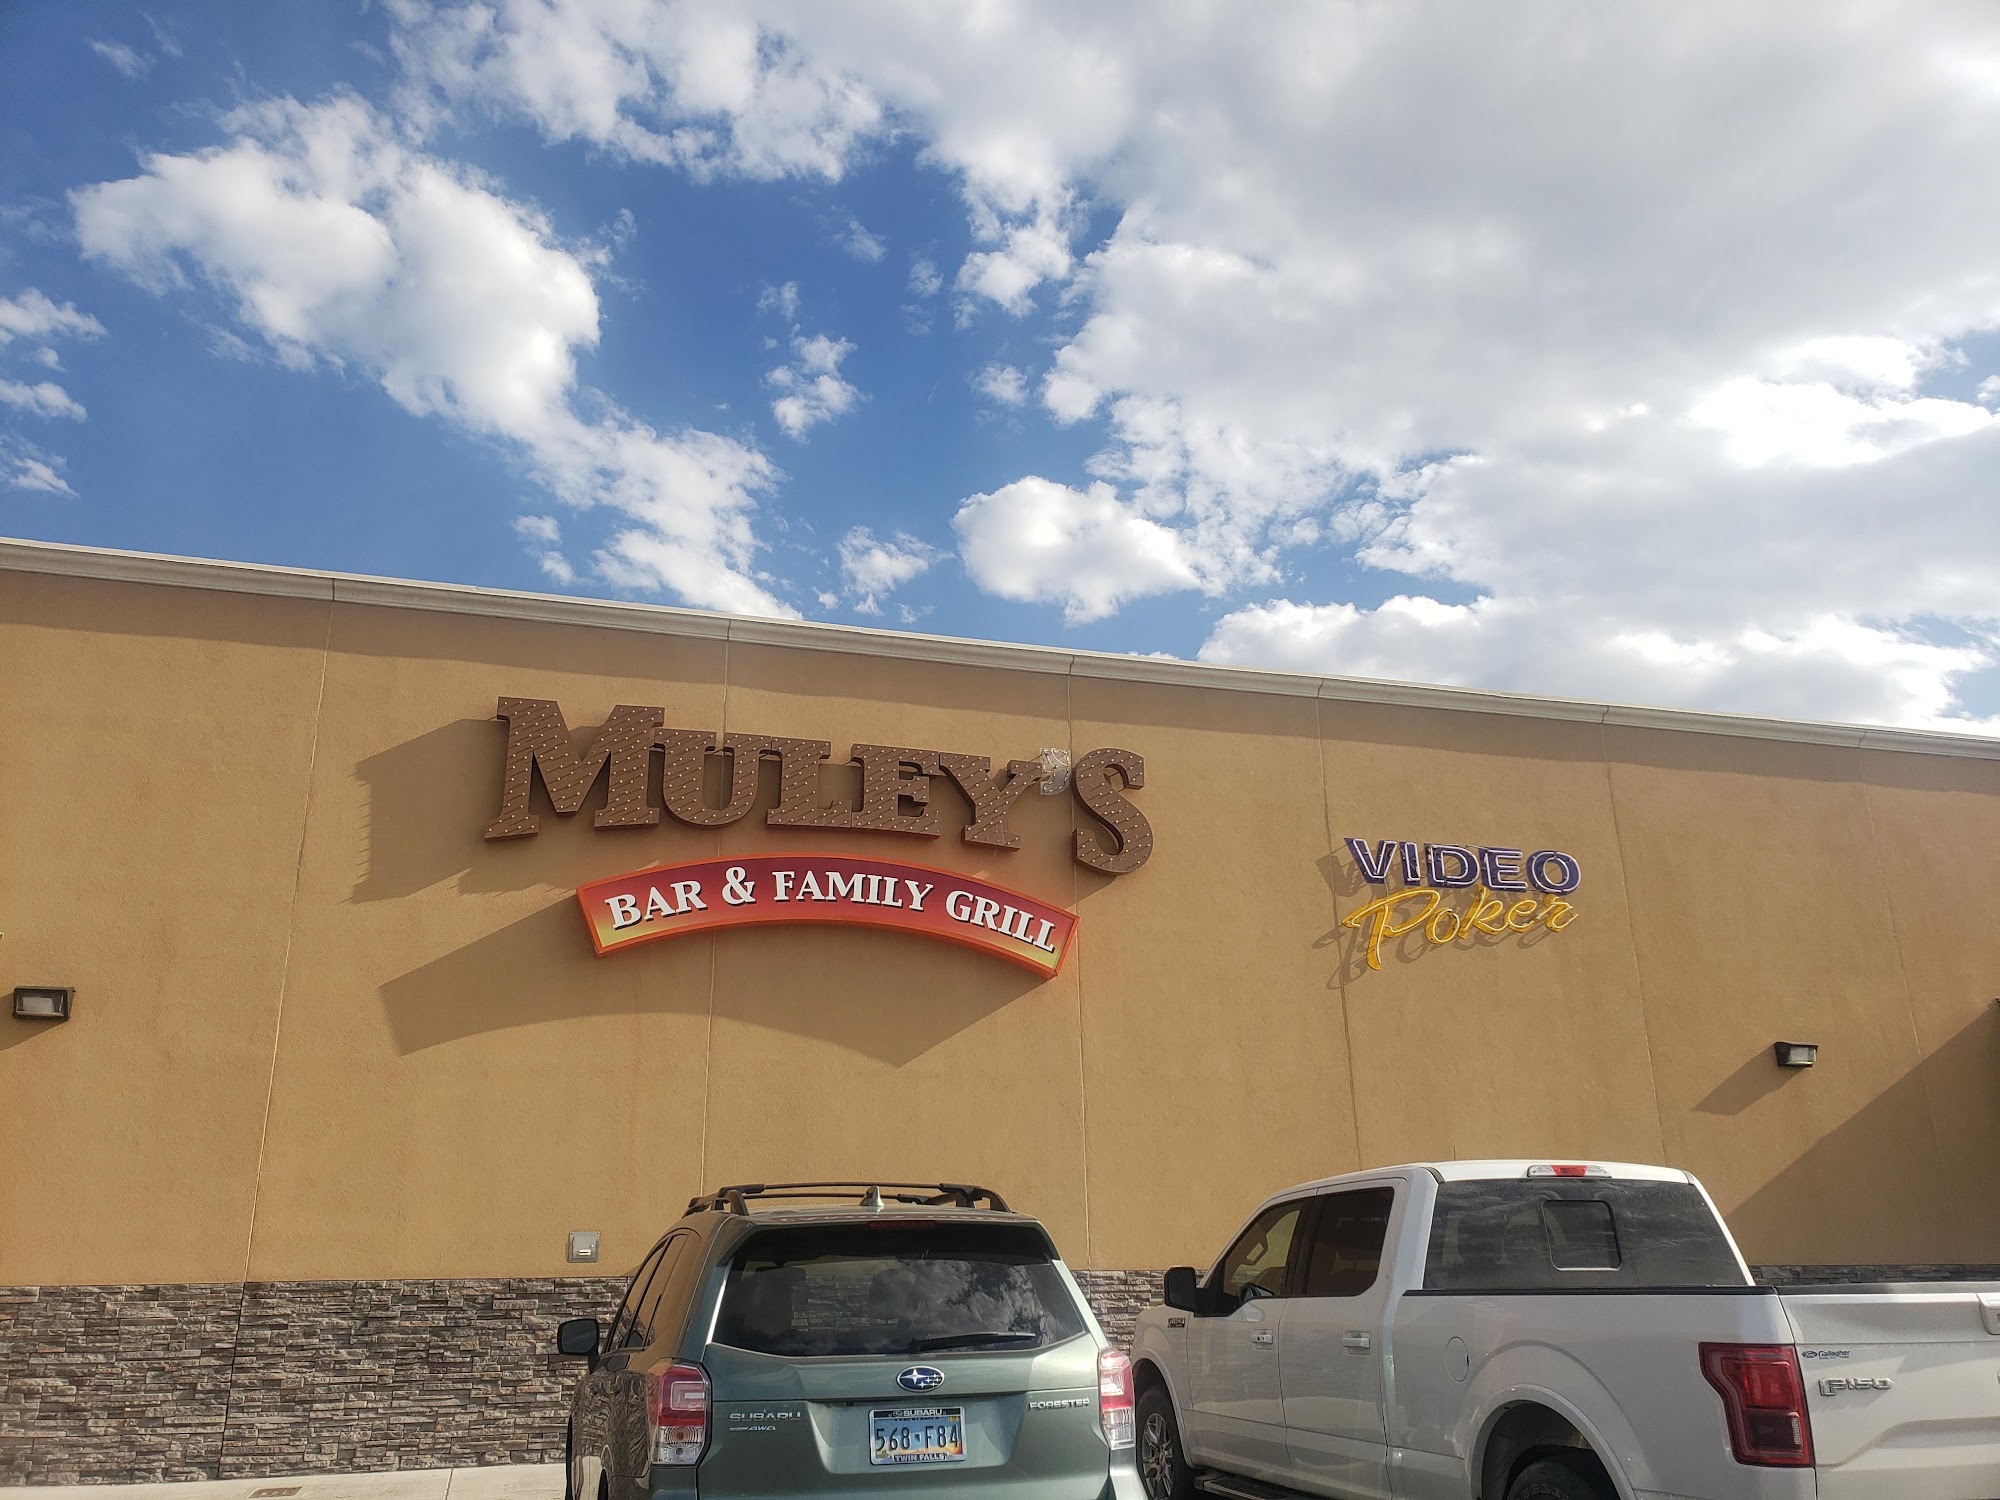 Muley's Bar & Family Grill